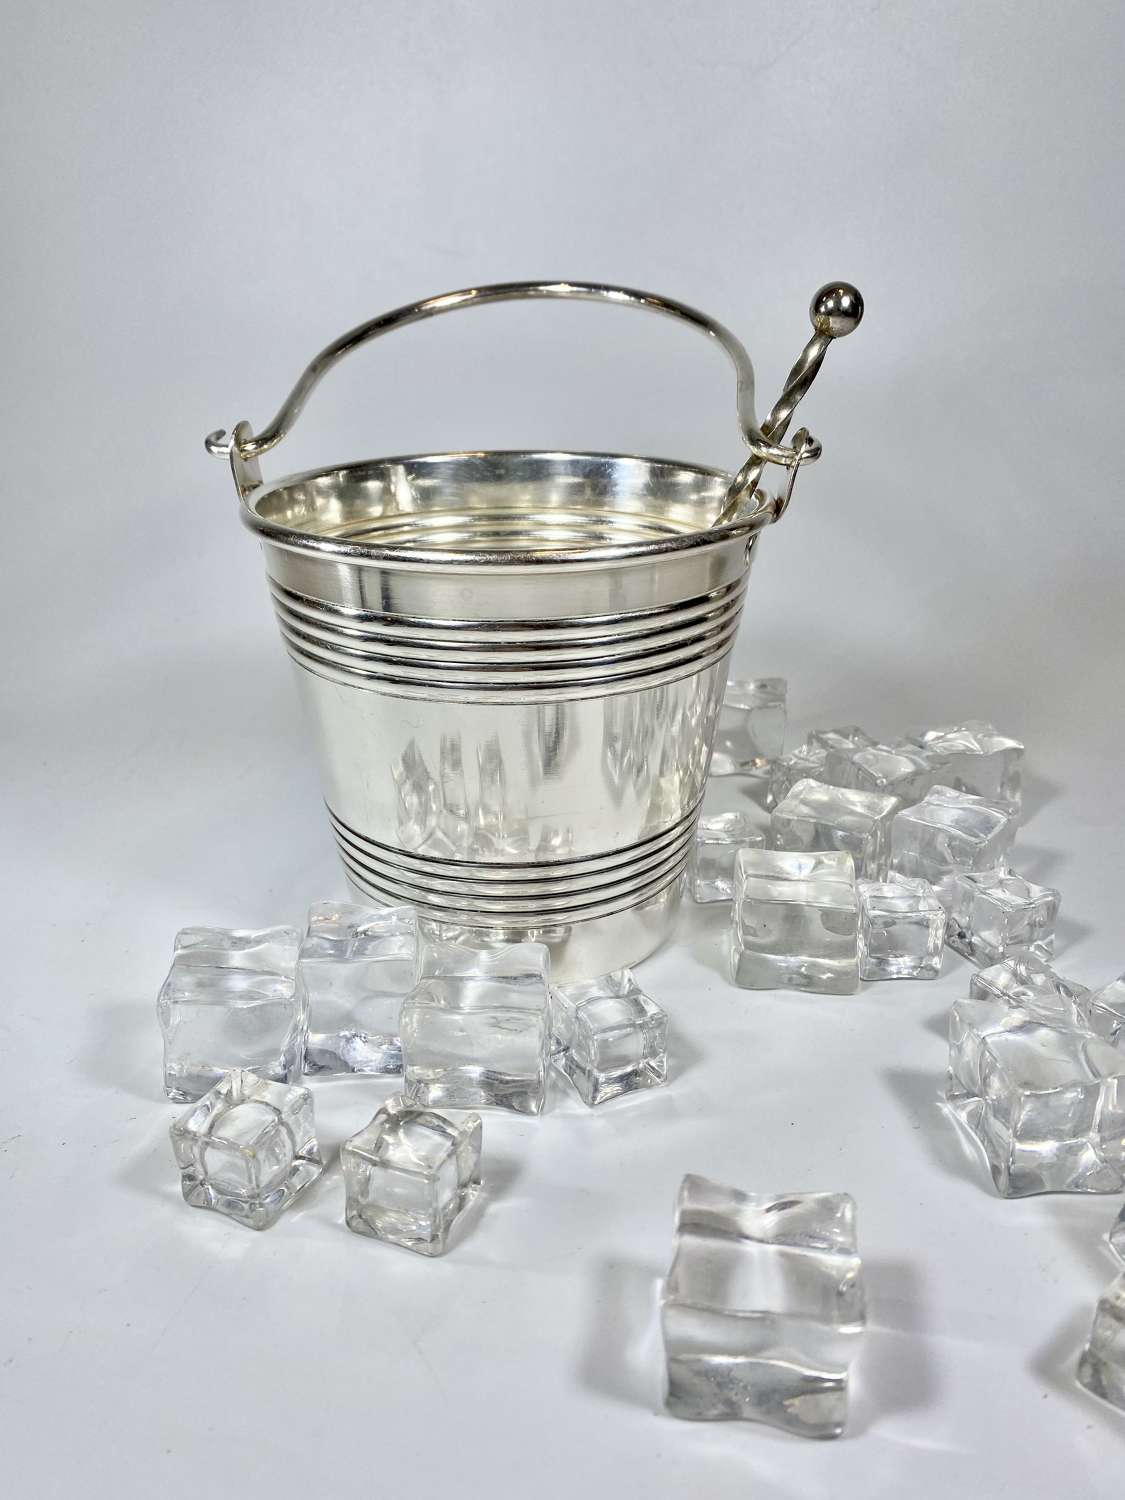 Silver plated ice bucket by Wiskemann & ice spoon